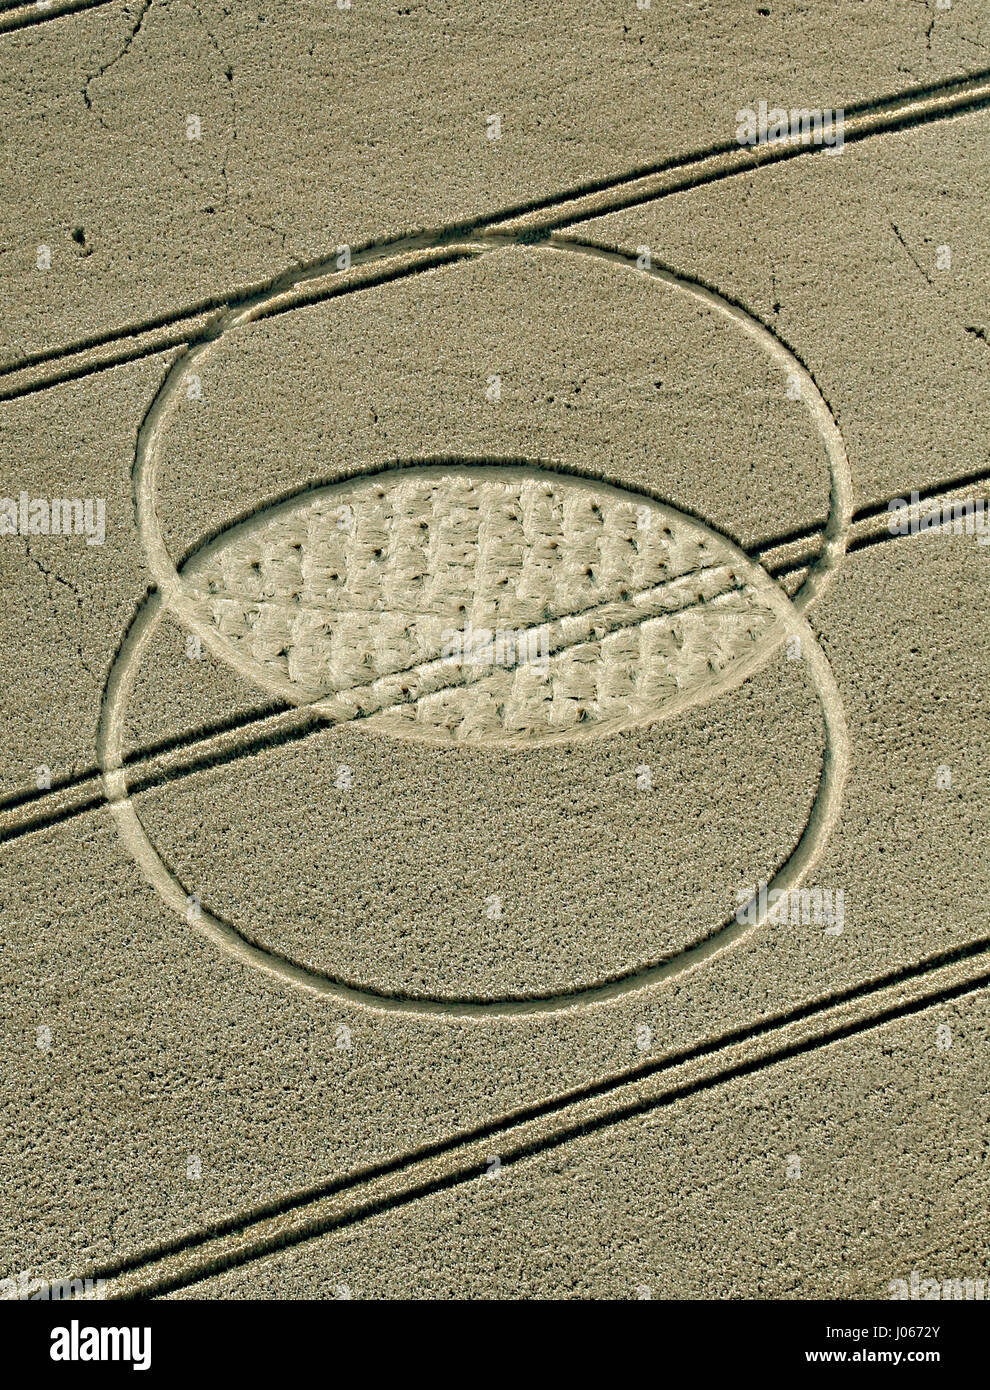 Foxhill, Wiltshire, UK: A CROP CIRCLE researcher claims the mysterious phenomenon is a temporary relief for Parkinson’s disease sufferers. In a story similar to the Oscar-winning 1985 fantasy film Cocoon, where the elderly have the signs of old age reversed by beings from another world, some British researchers now claim crop circles could have a similar effect in reality. Twenty-five years of study by scientific researcher Lucy Pringle, from Hampshire has revealed the beneficial effects of being inside a crop circle for sufferers of Parkinson’s disease. People suffering from the disease have  Stock Photo